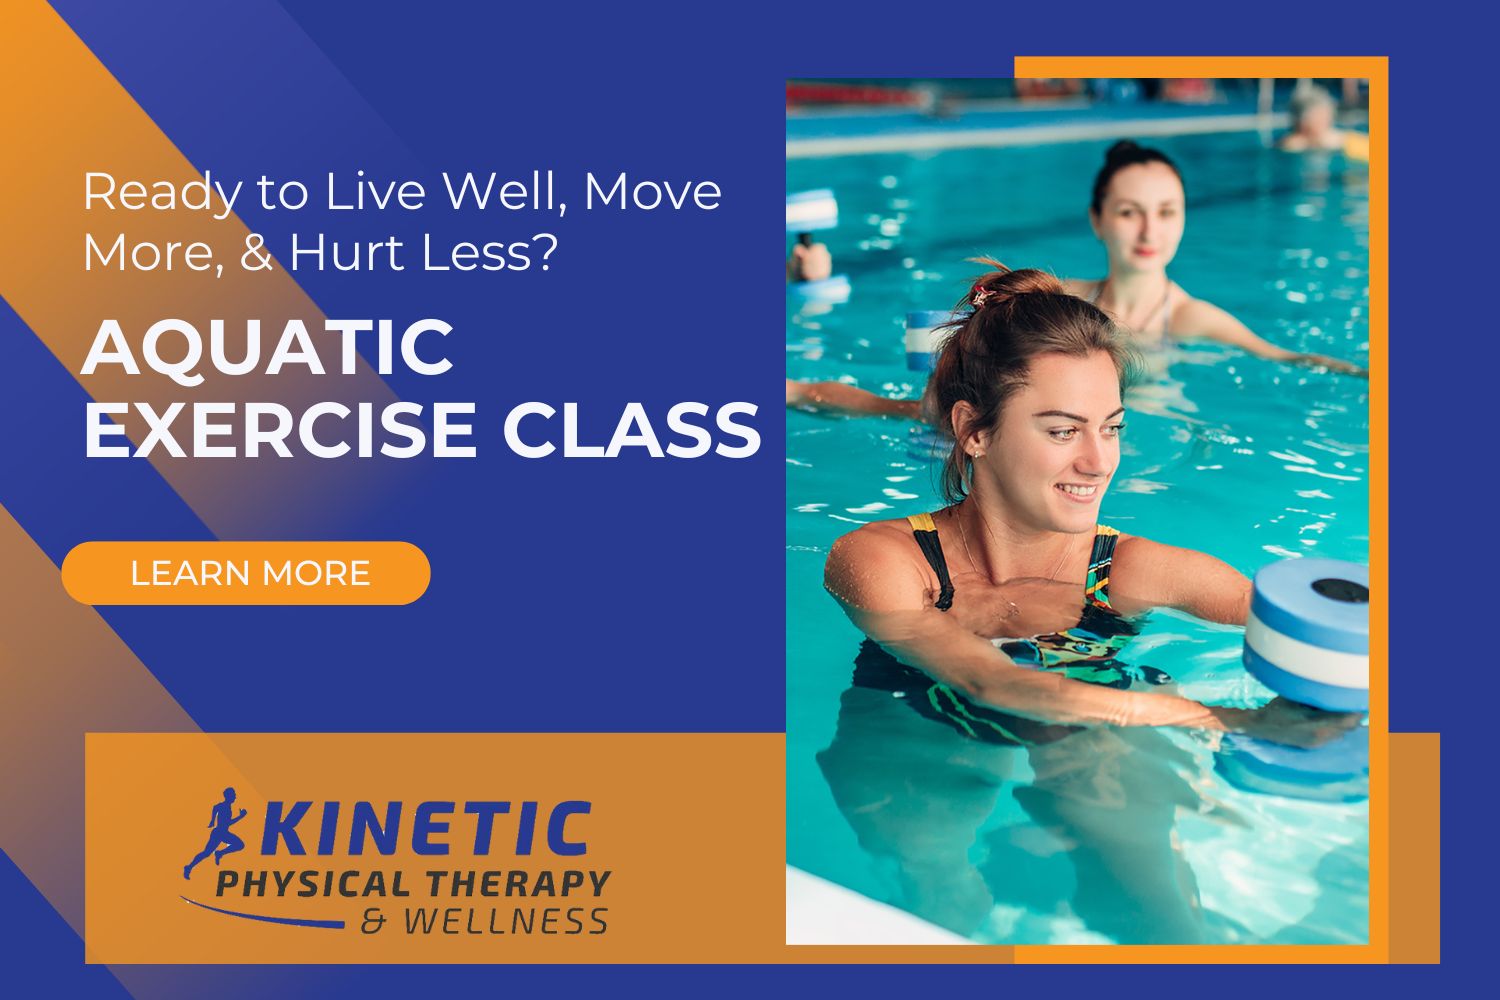 Aquatic Exercise Class in Greenville NC